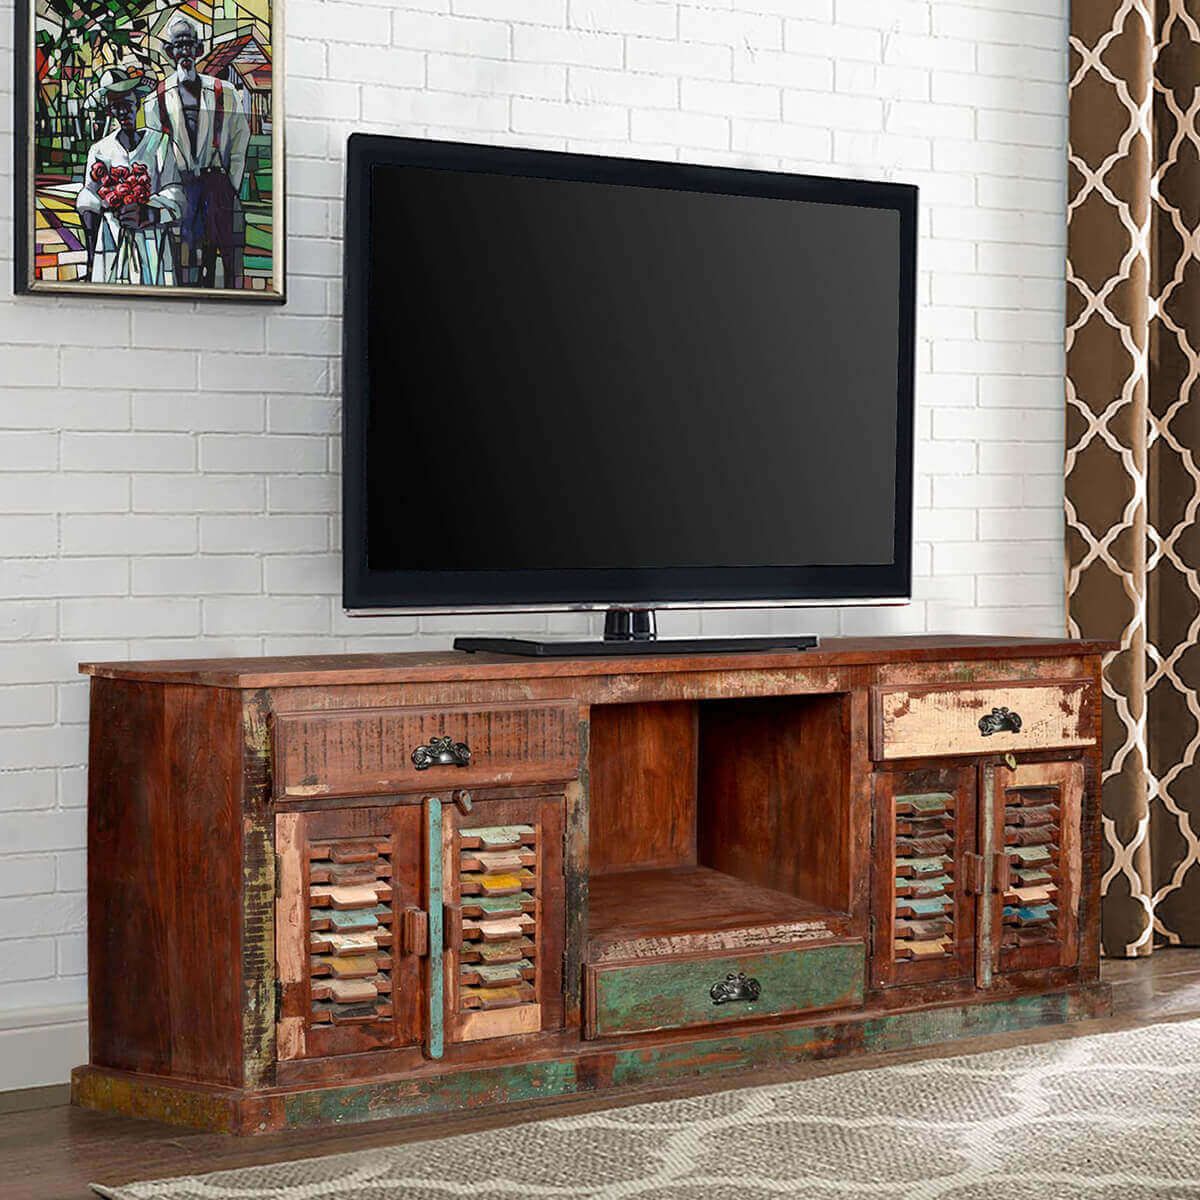 Rustic Reclaimed Wood Large Tv Stand Media Console Inside Rustic Tv Stands For Sale (View 5 of 15)